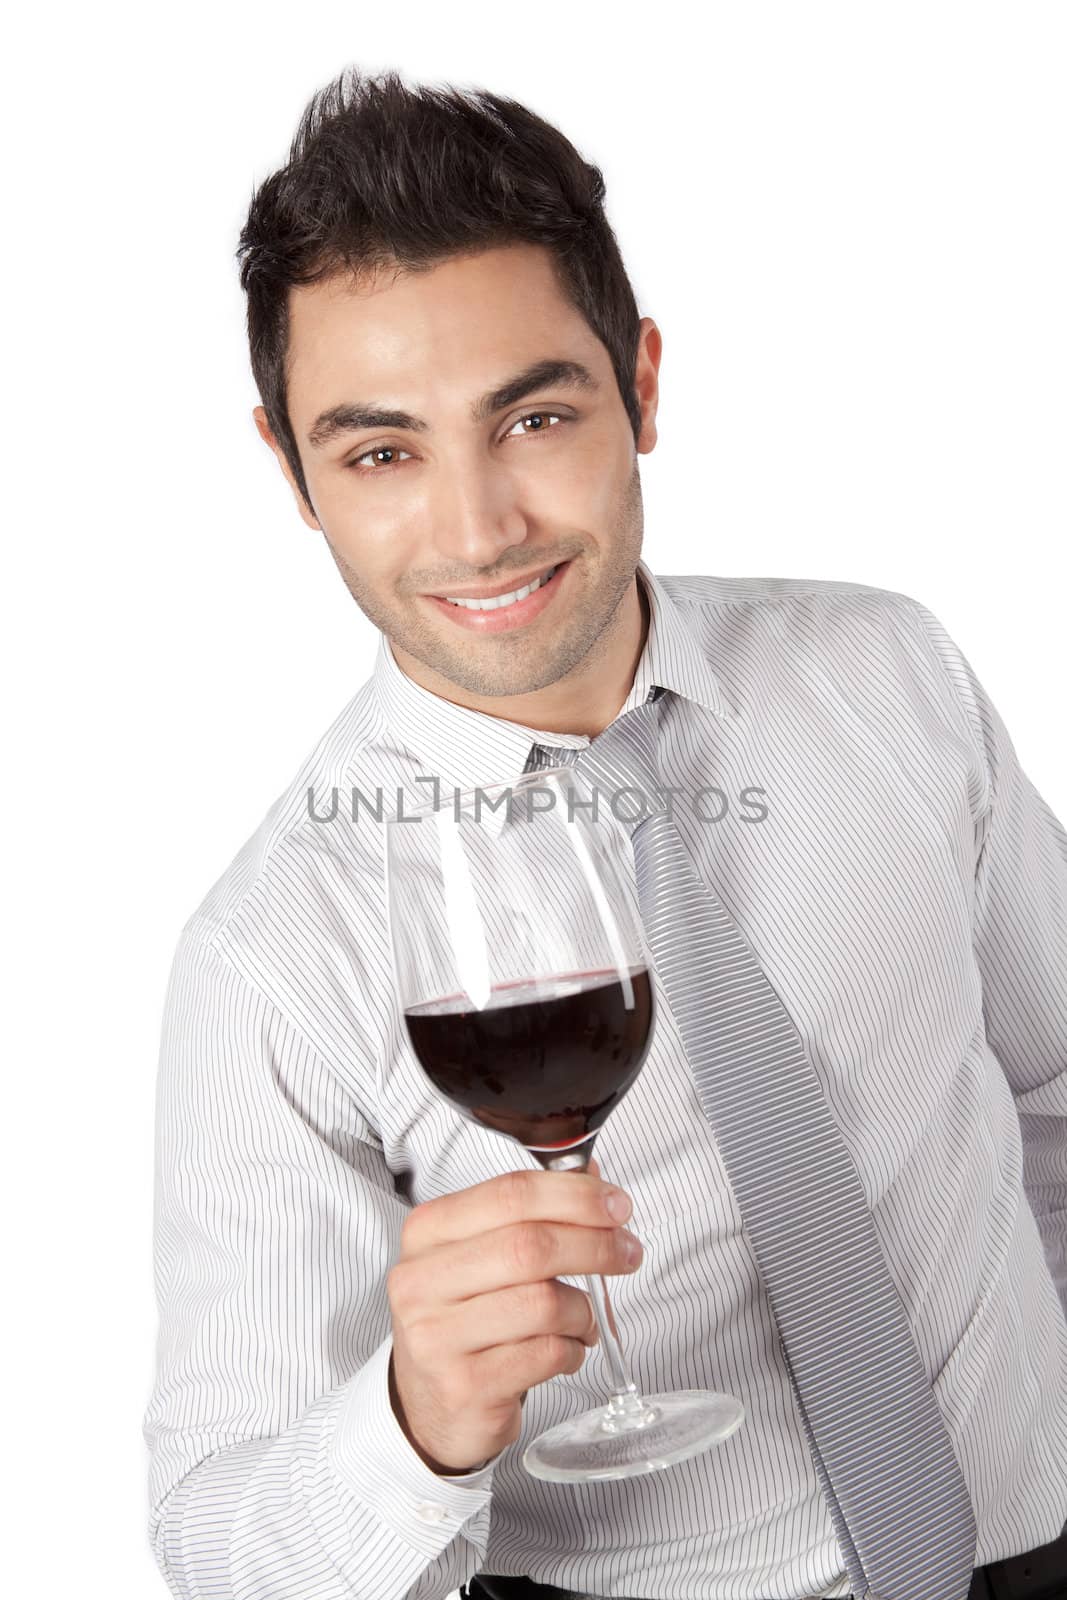 Young businessman holding red wine glass isolated on white background.